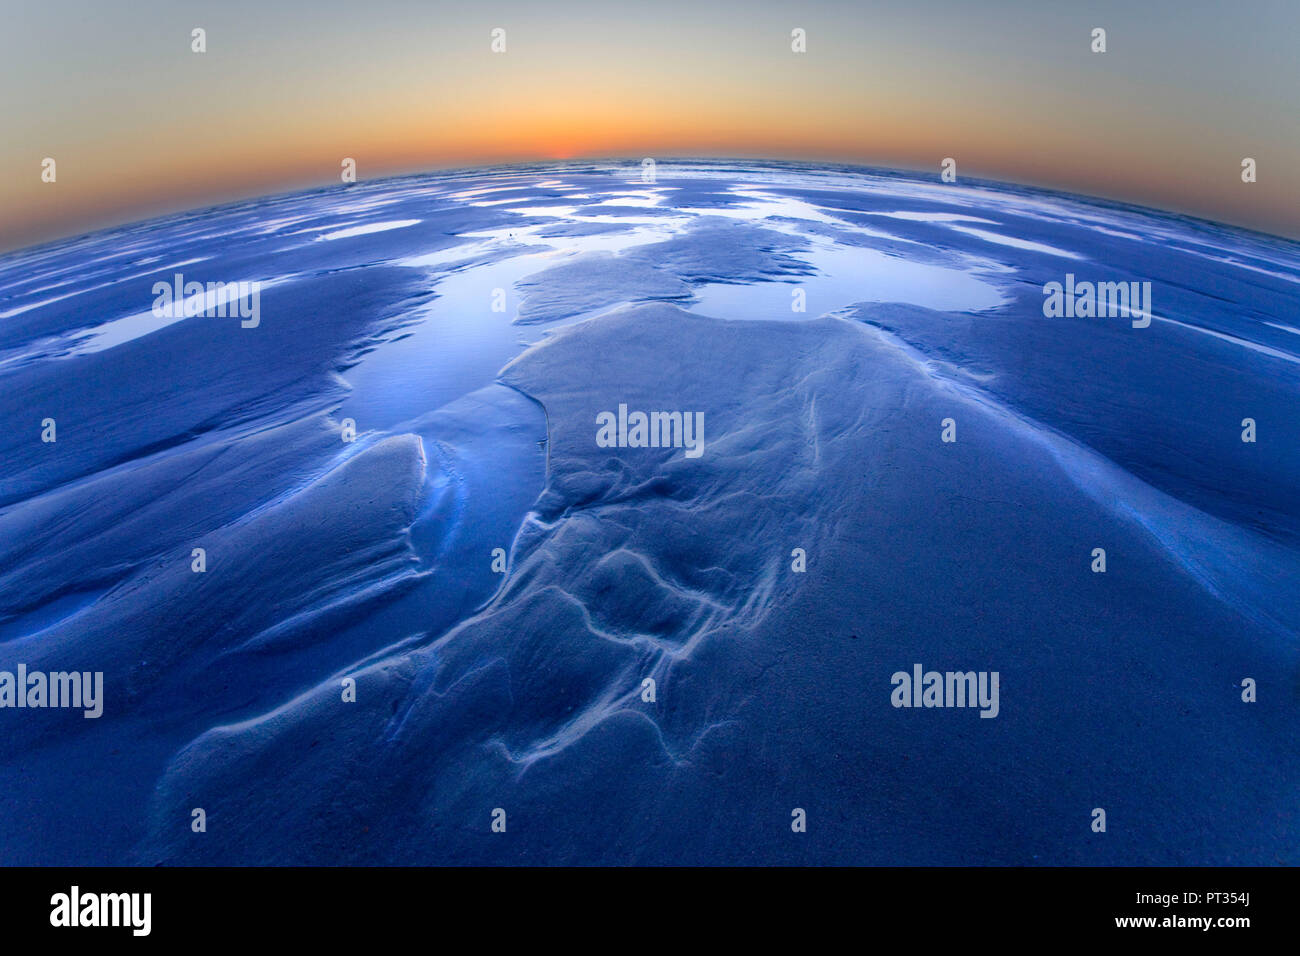 Impression of blue planet and earth`s curvature, Camera is very low to the ground, not high in the sky, wide angle, Stock Photo